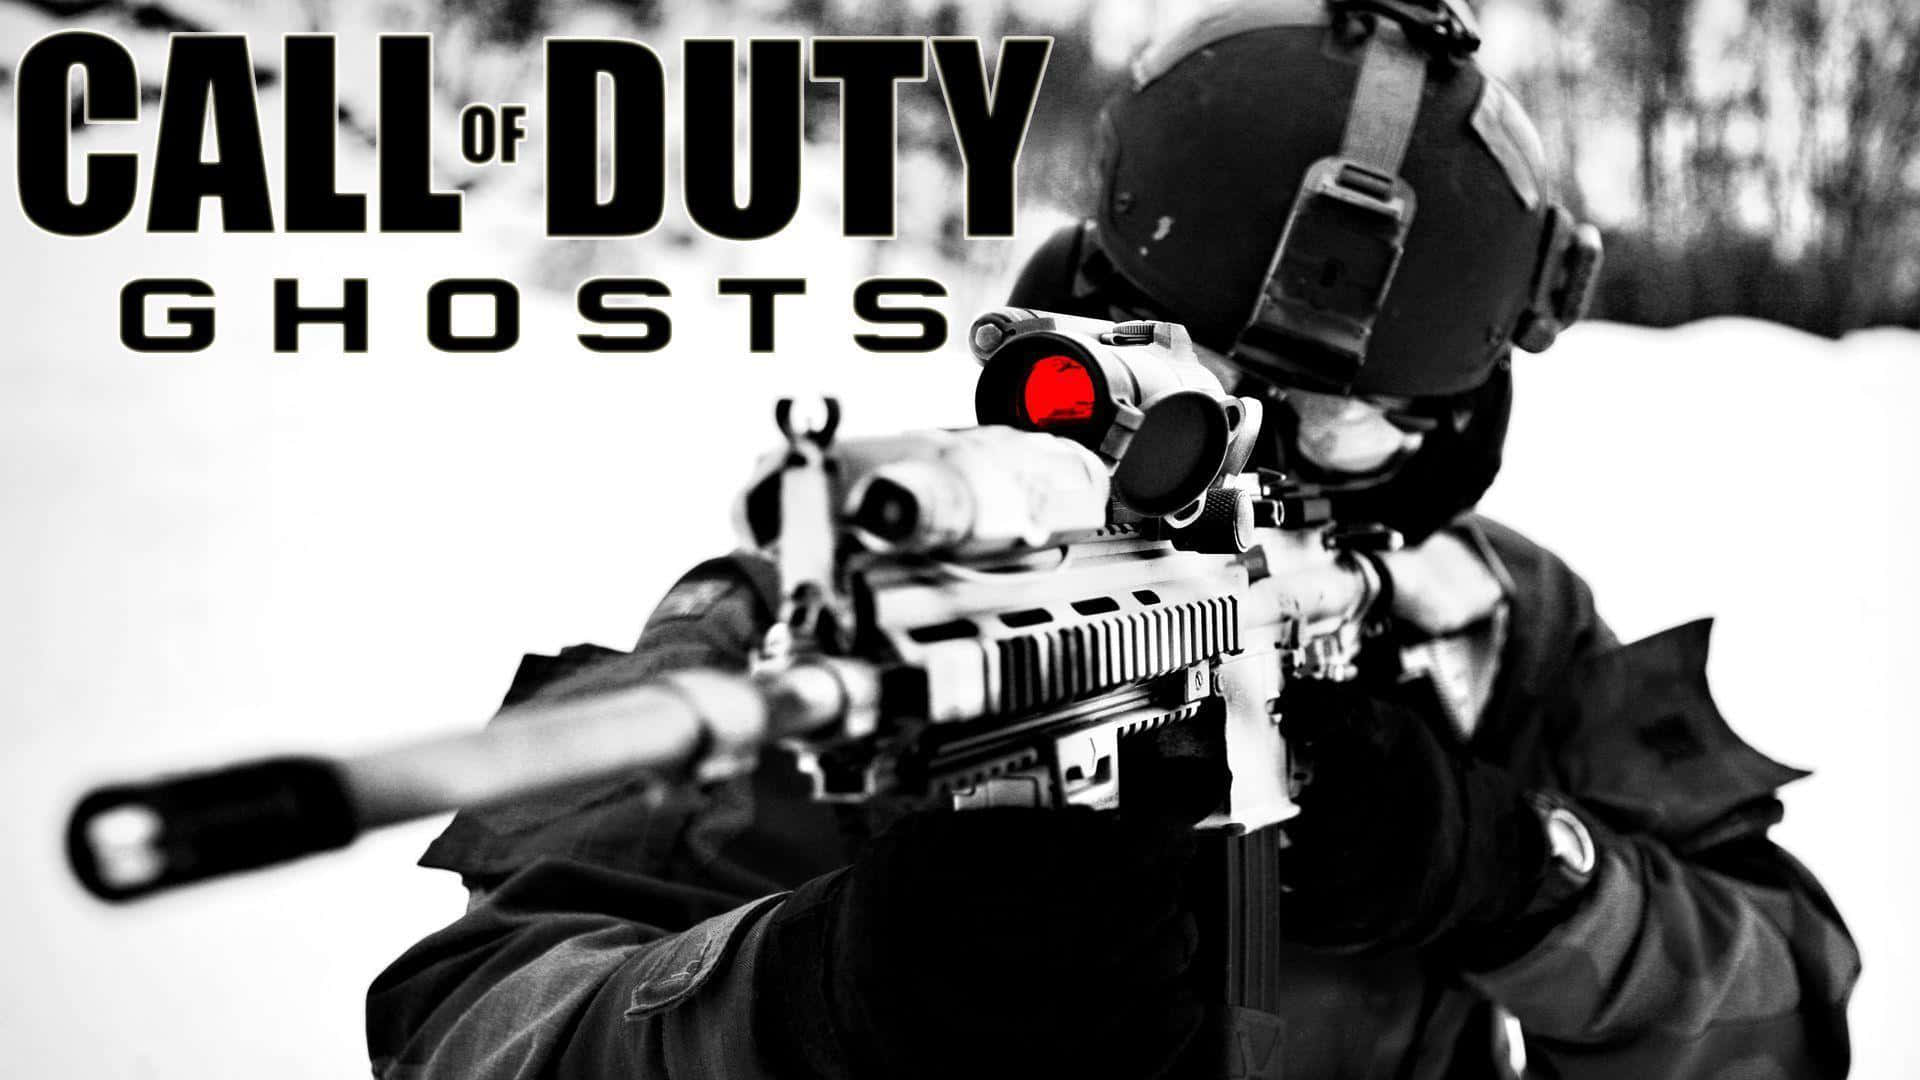 Intense Call of Duty Ghosts Action Scene Wallpaper